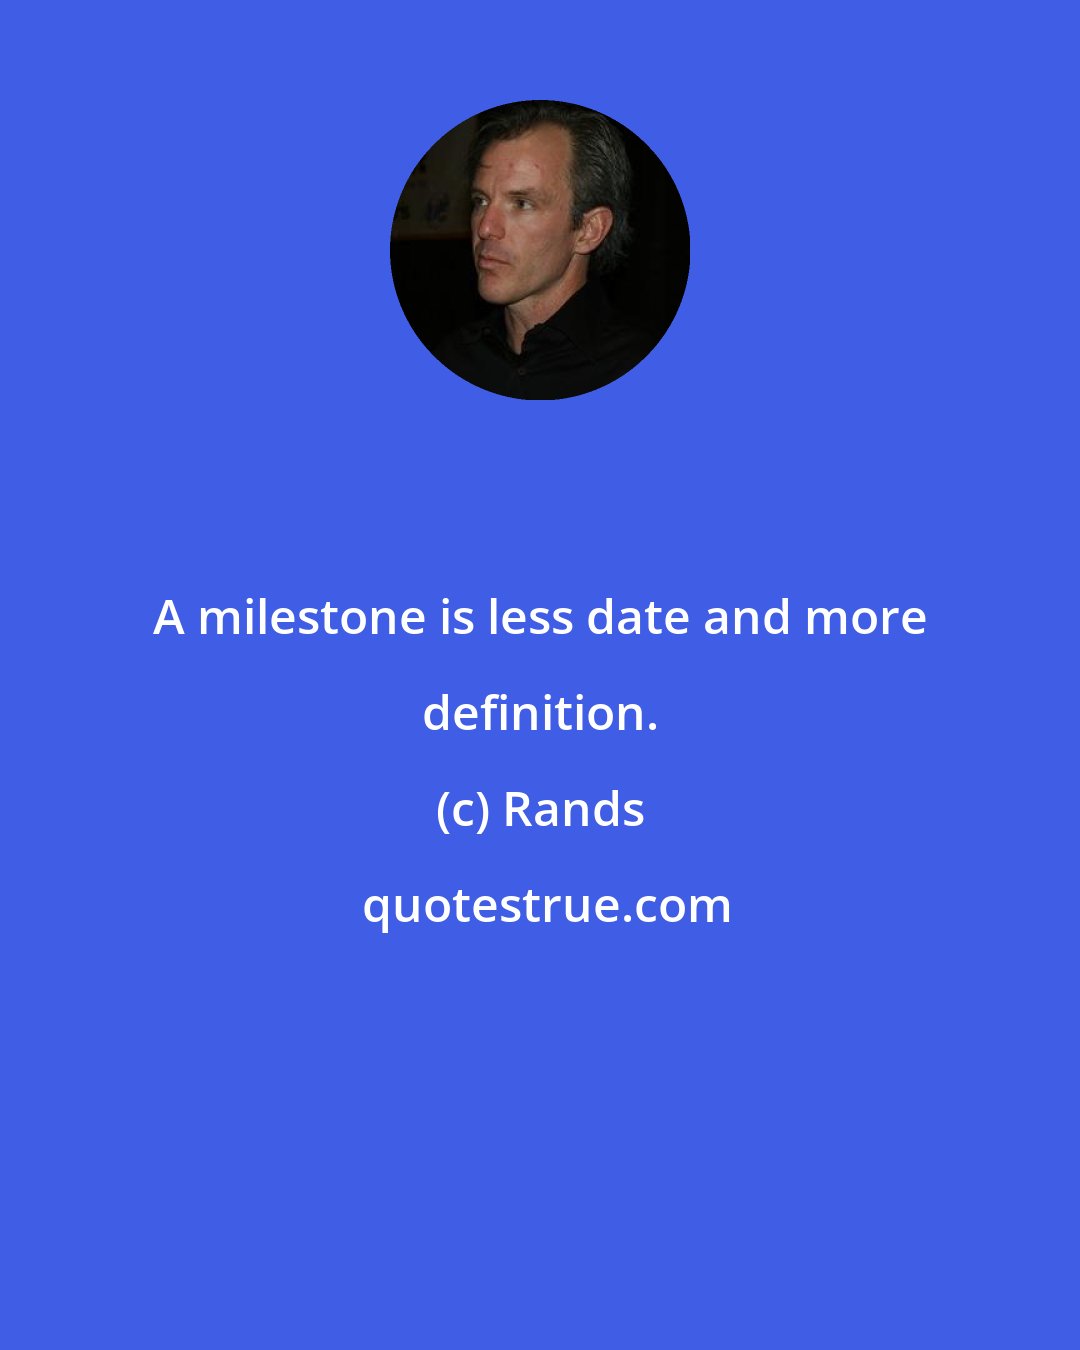 Rands: A milestone is less date and more definition.